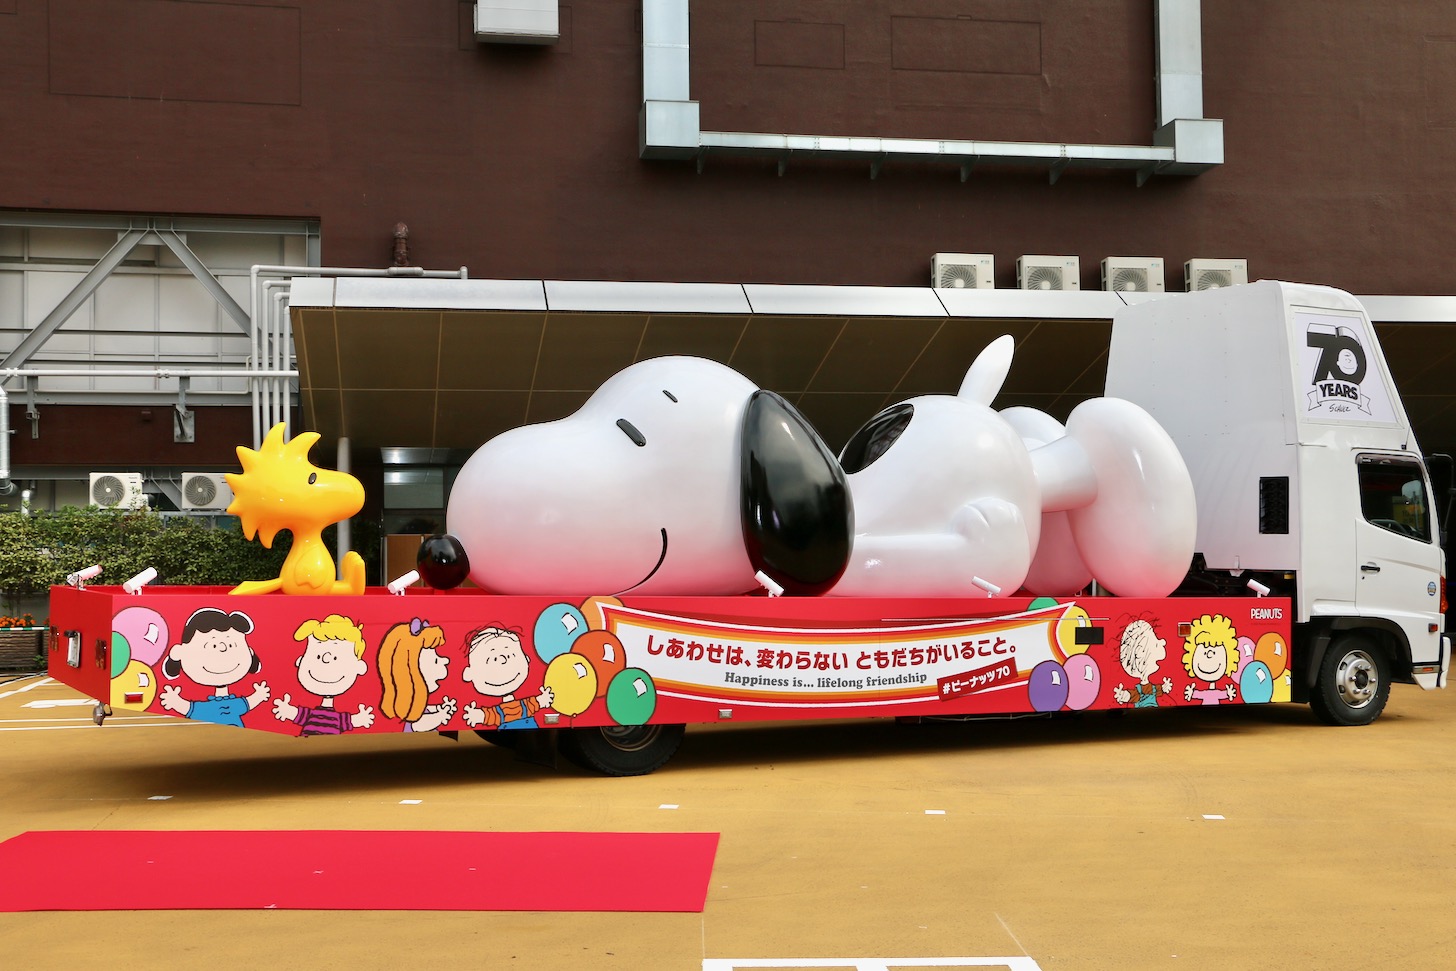 SNOOPY HAPPINESS FLOAT